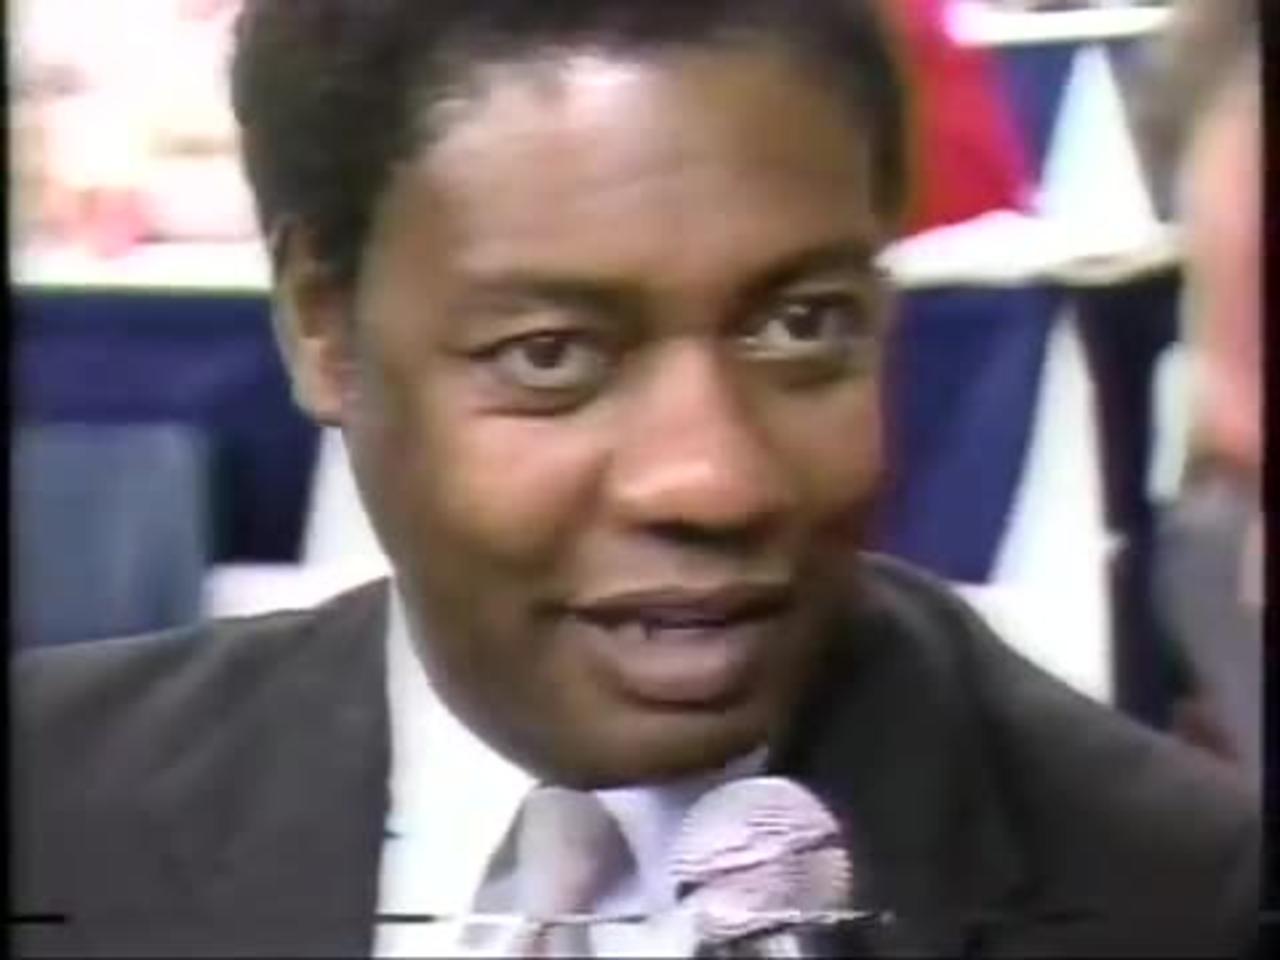 February 10, 1985 - Oscar Robertson at the NBA All-Star Game in Indianapolis